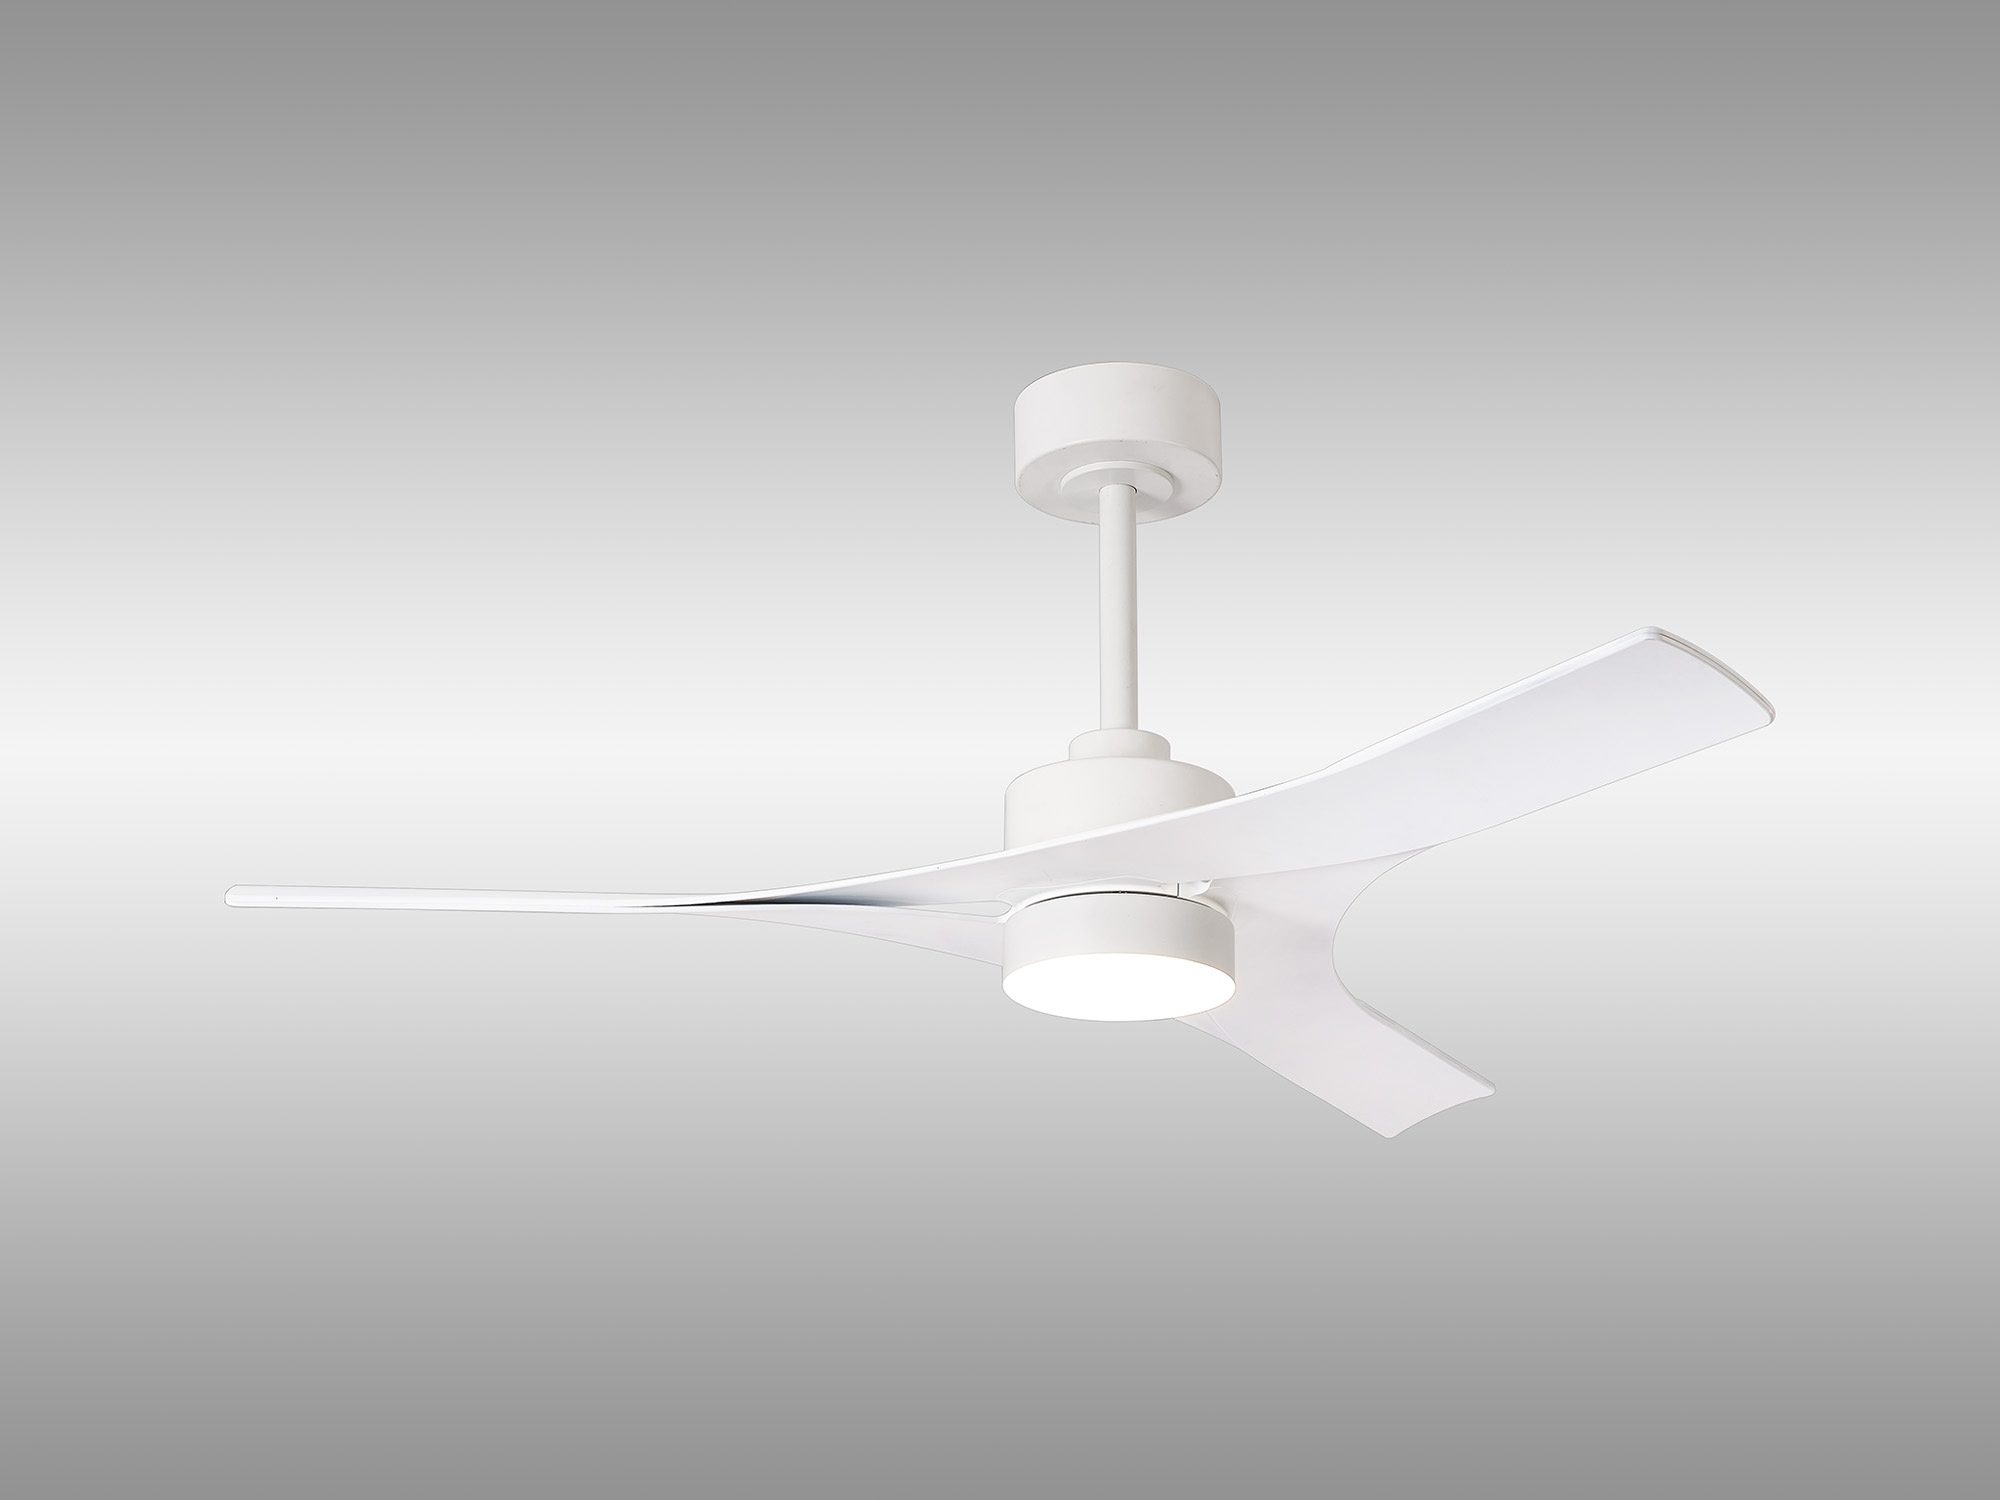 Thai Heating, Cooling & Ventilation Mantra Ceiling Fans